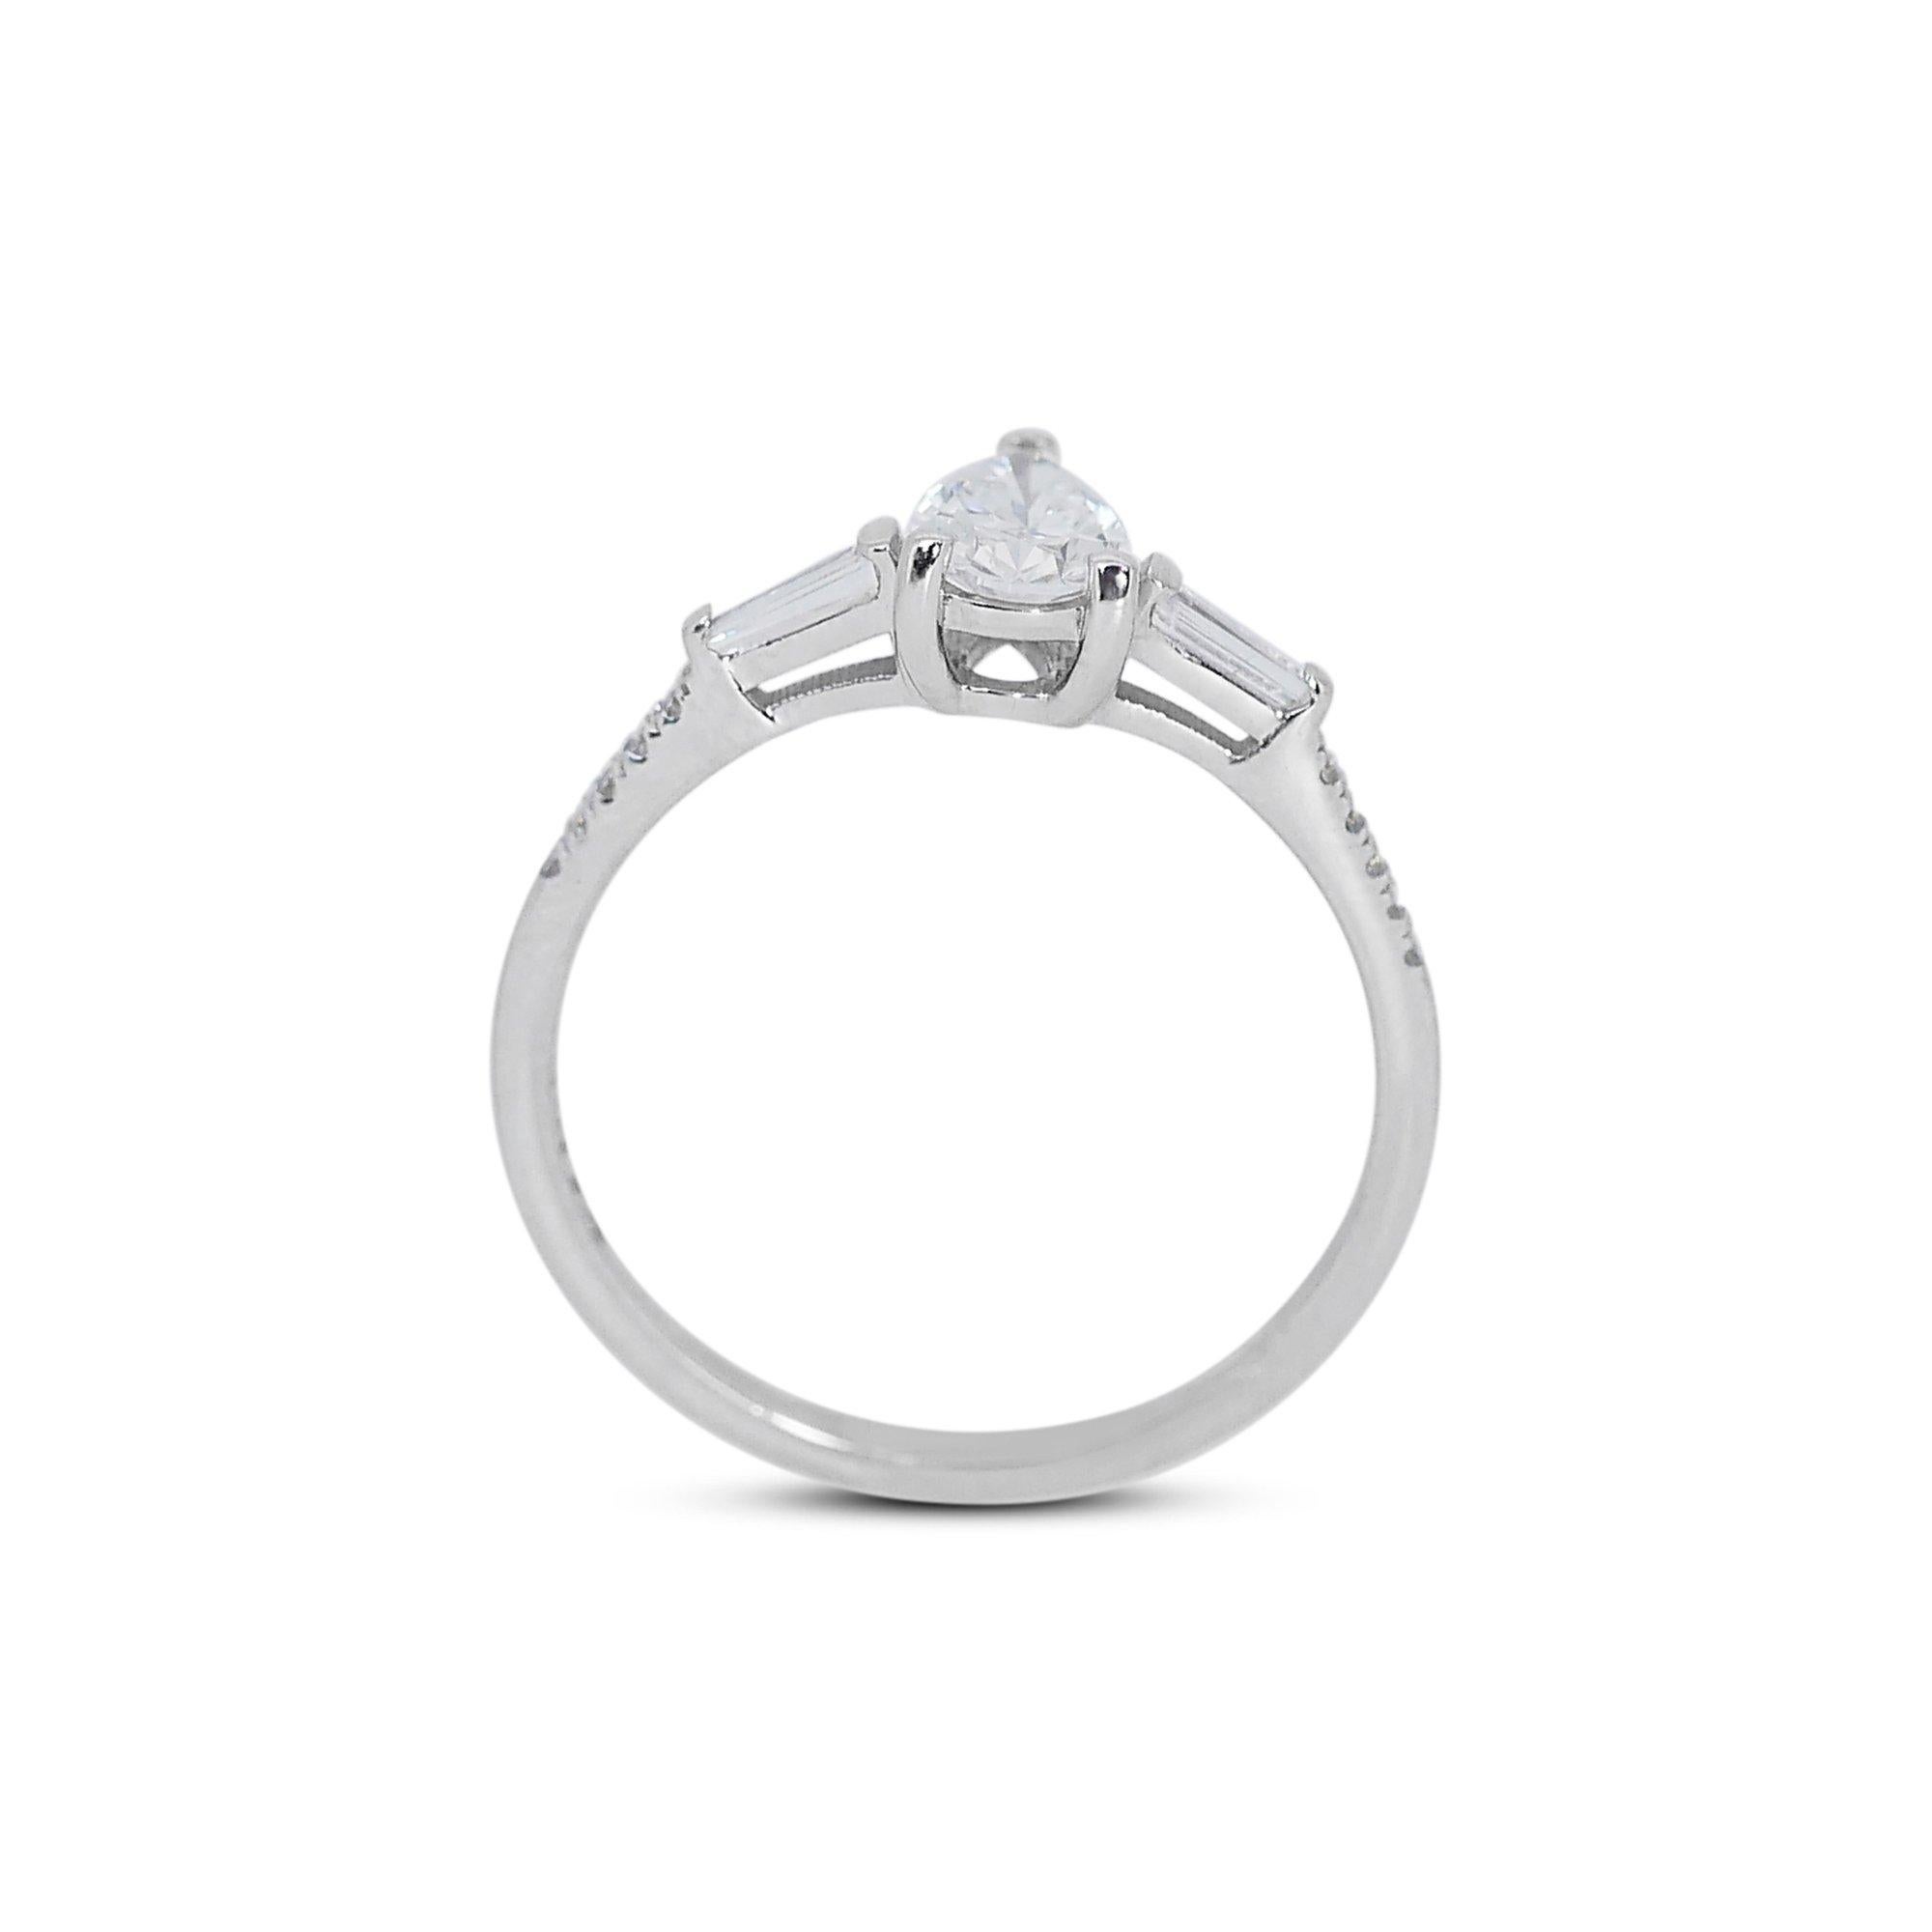 Classic 18k White Gold Natural Diamond Solitaire Ring w/0.93 ct - GIA Certified

Featuring this mesmerizing diamond solitaire ring that embodies timeless beauty and classic design. With a mesmerizing 0.70 carat pear-shaped diamond center stone,